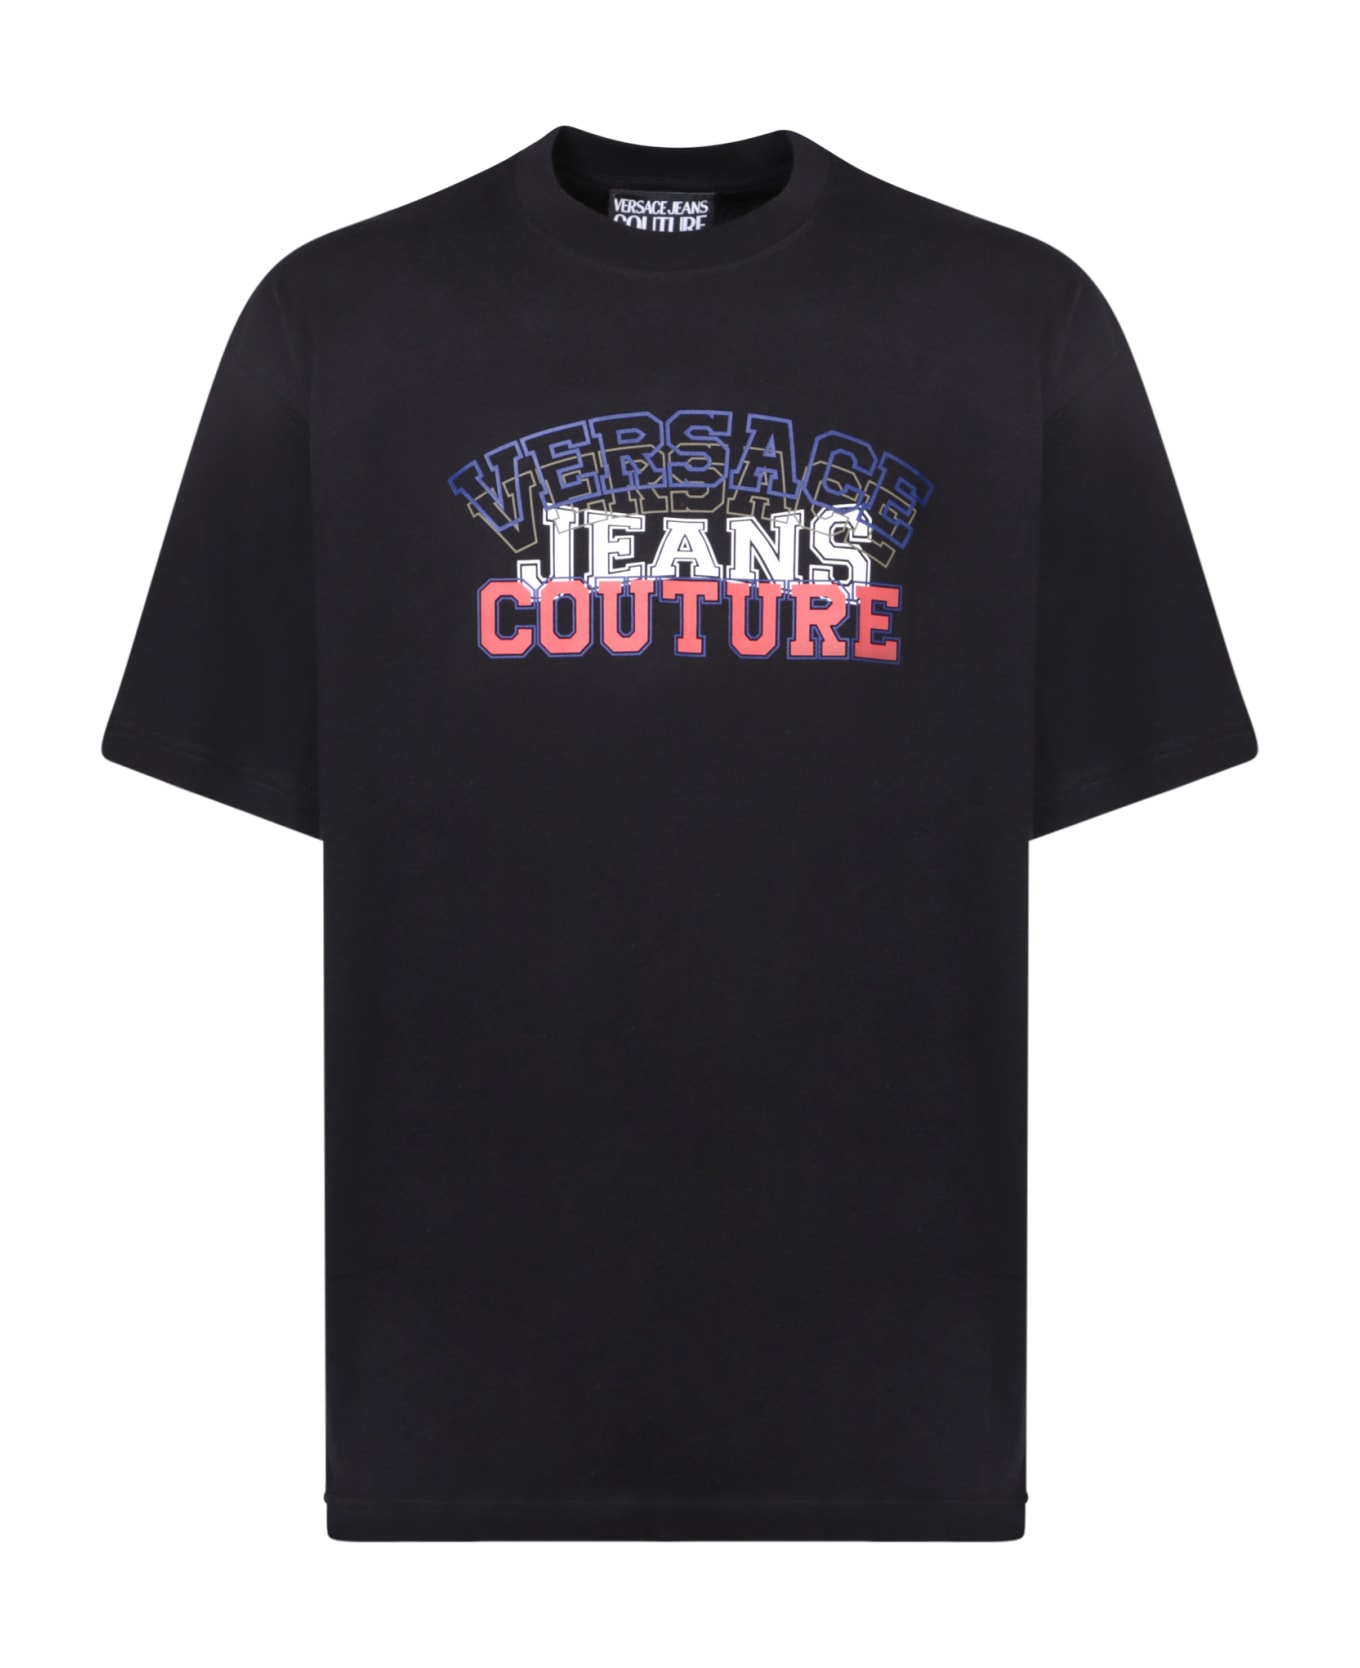 Versace Jeans Couture Collage Print T-shirt - Black シャツ